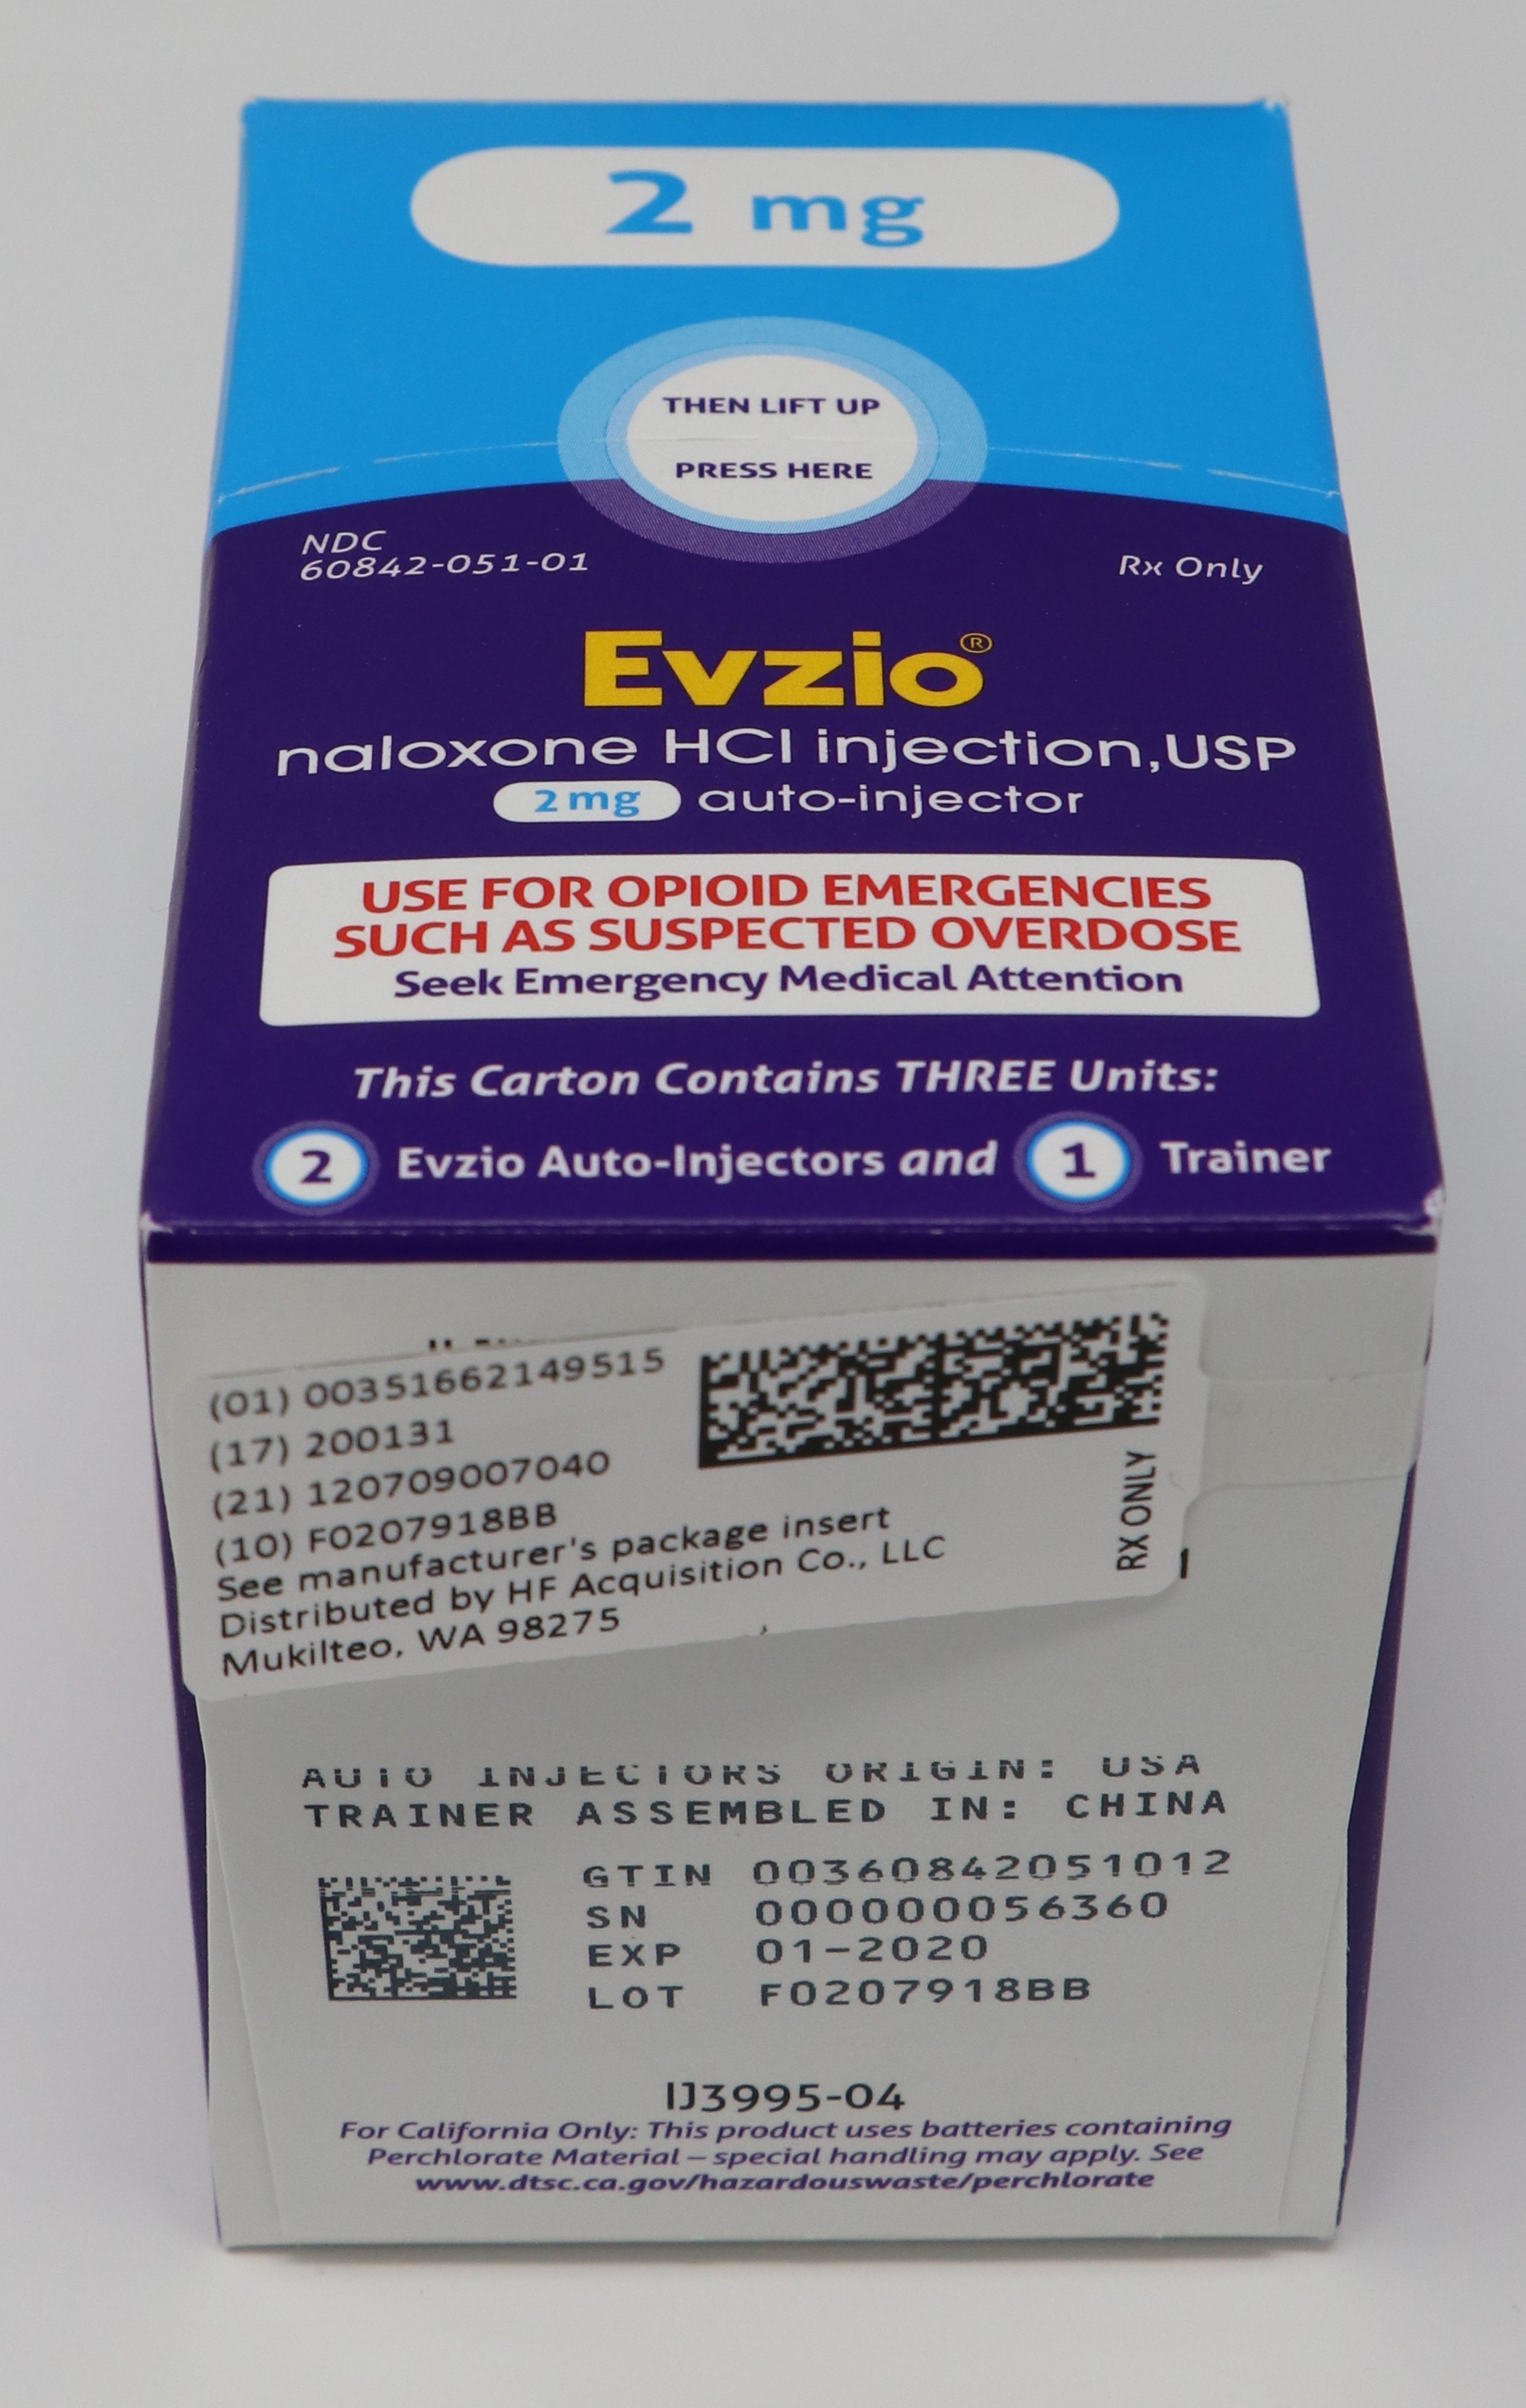 SERIALIZED CARTON LABELING